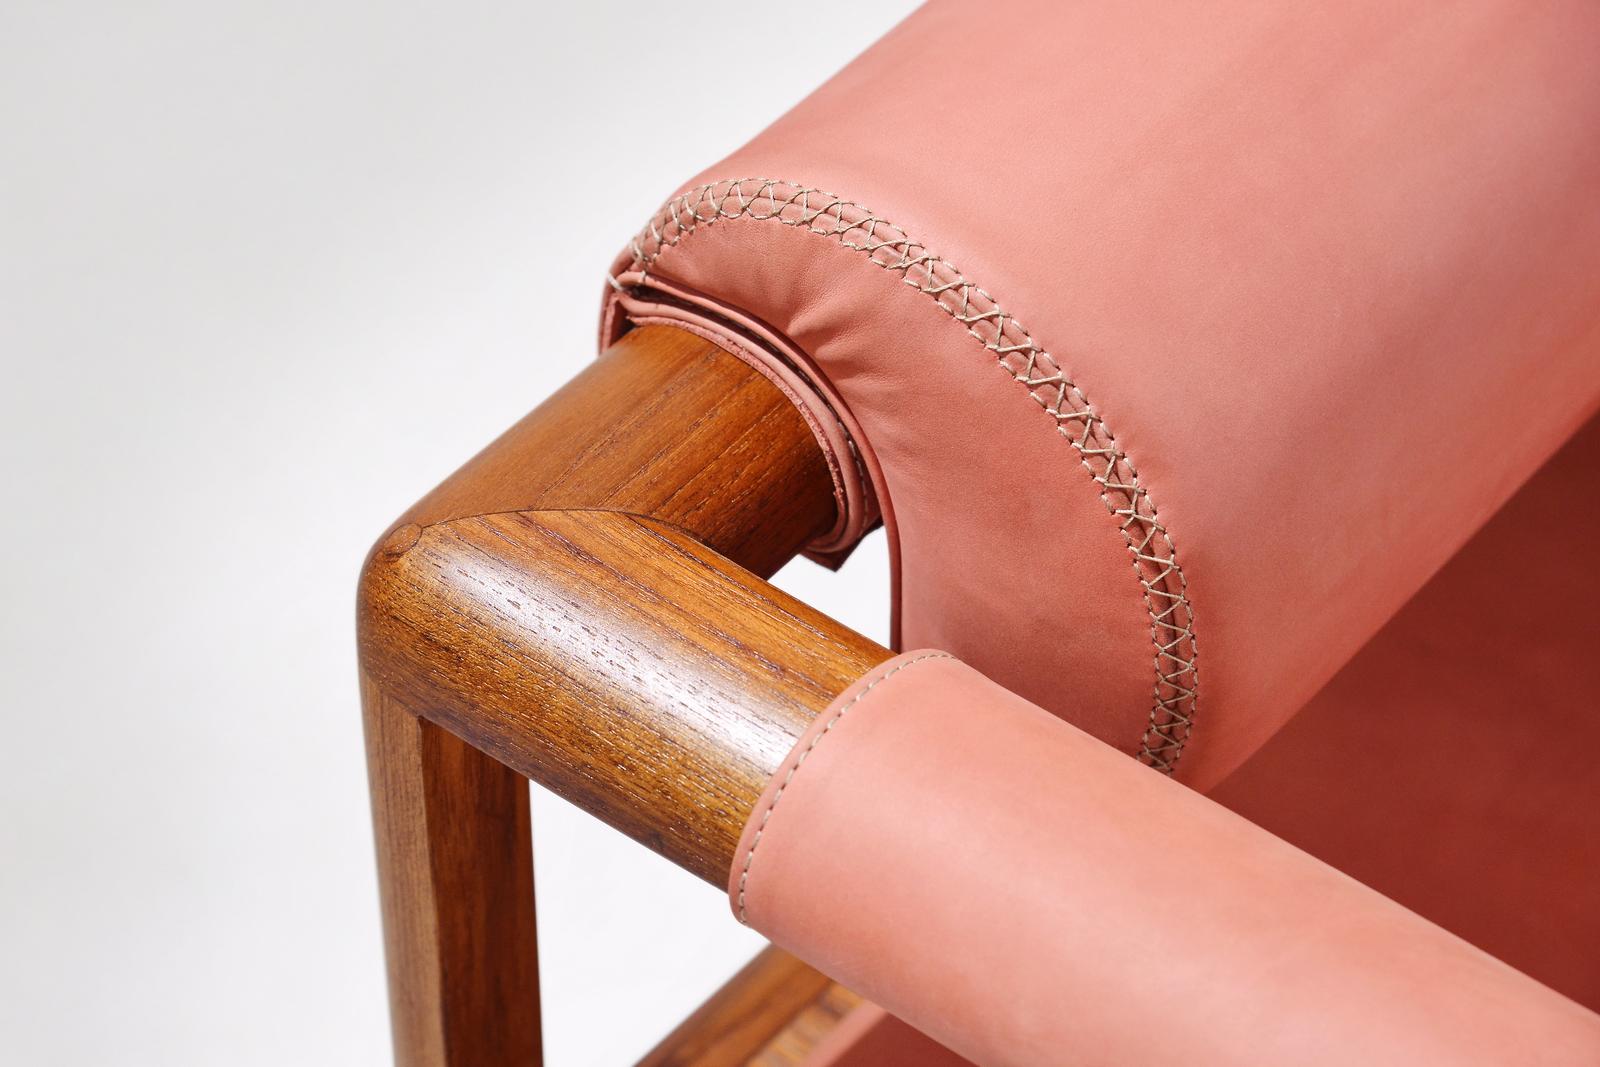 Bespoke Chair Reclaimed Hardwood Hand Stitched Leather Seating, P. Tendercool For Sale 1